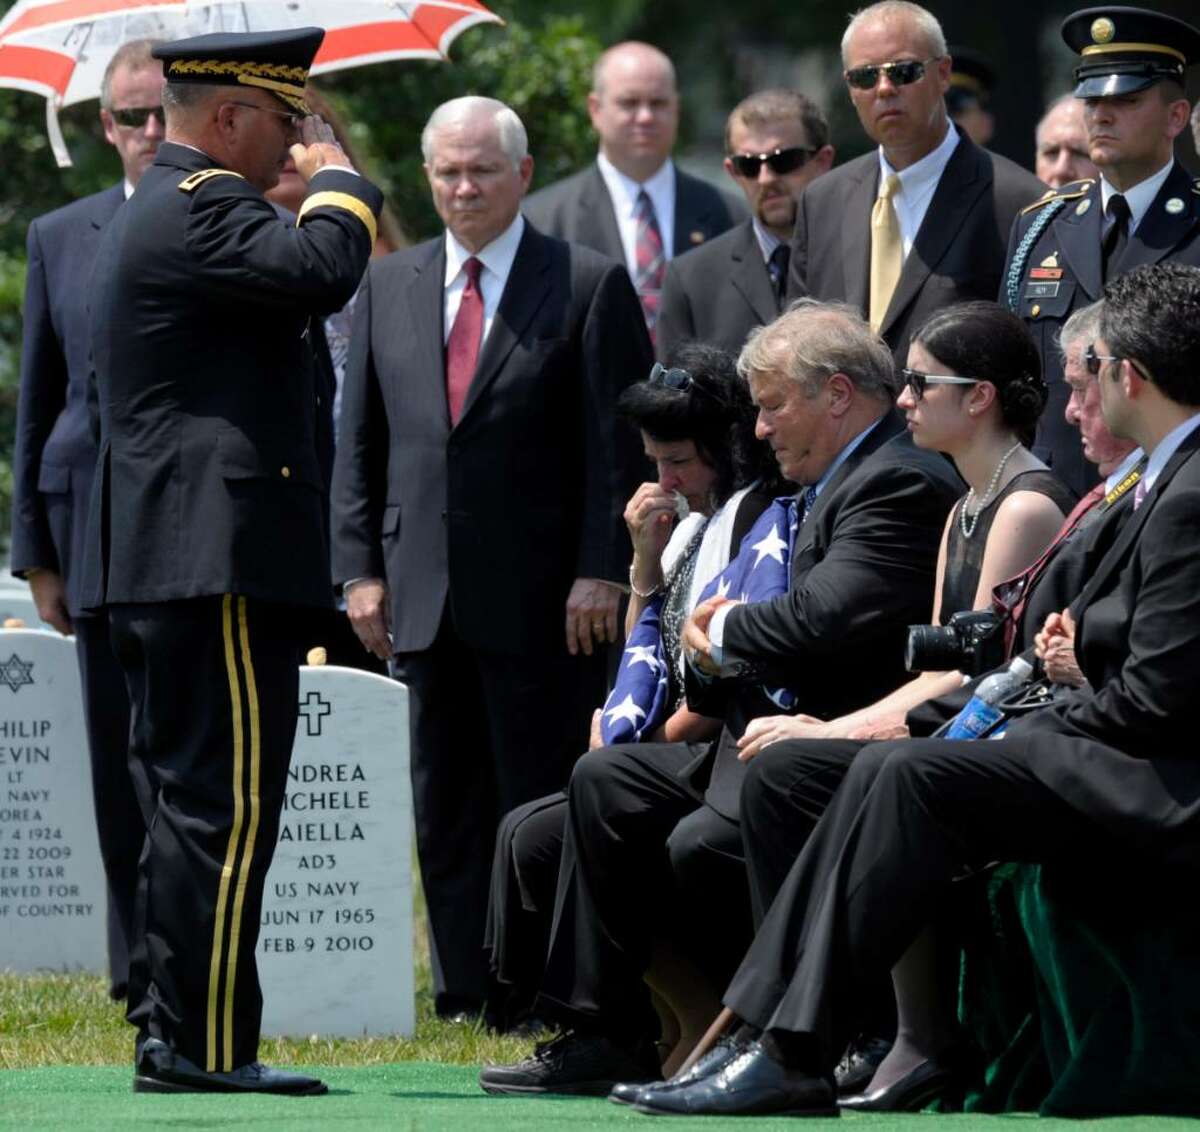 Defense Secretary Robert Gates, center, watches as Maj. Gen. Richard Formica, left, salutes greets Leslie Miller, seated left, and Jesse Miller, seated second from left, parents of Army Pfc. David Taylor Miller, during his funeral service at Arlington National Cemetery in Arlington, Va., Wednesday, July 28, 2010. Miller of Wilton died June 21 in Afghanistan. (AP Photo/Susan Walsh)